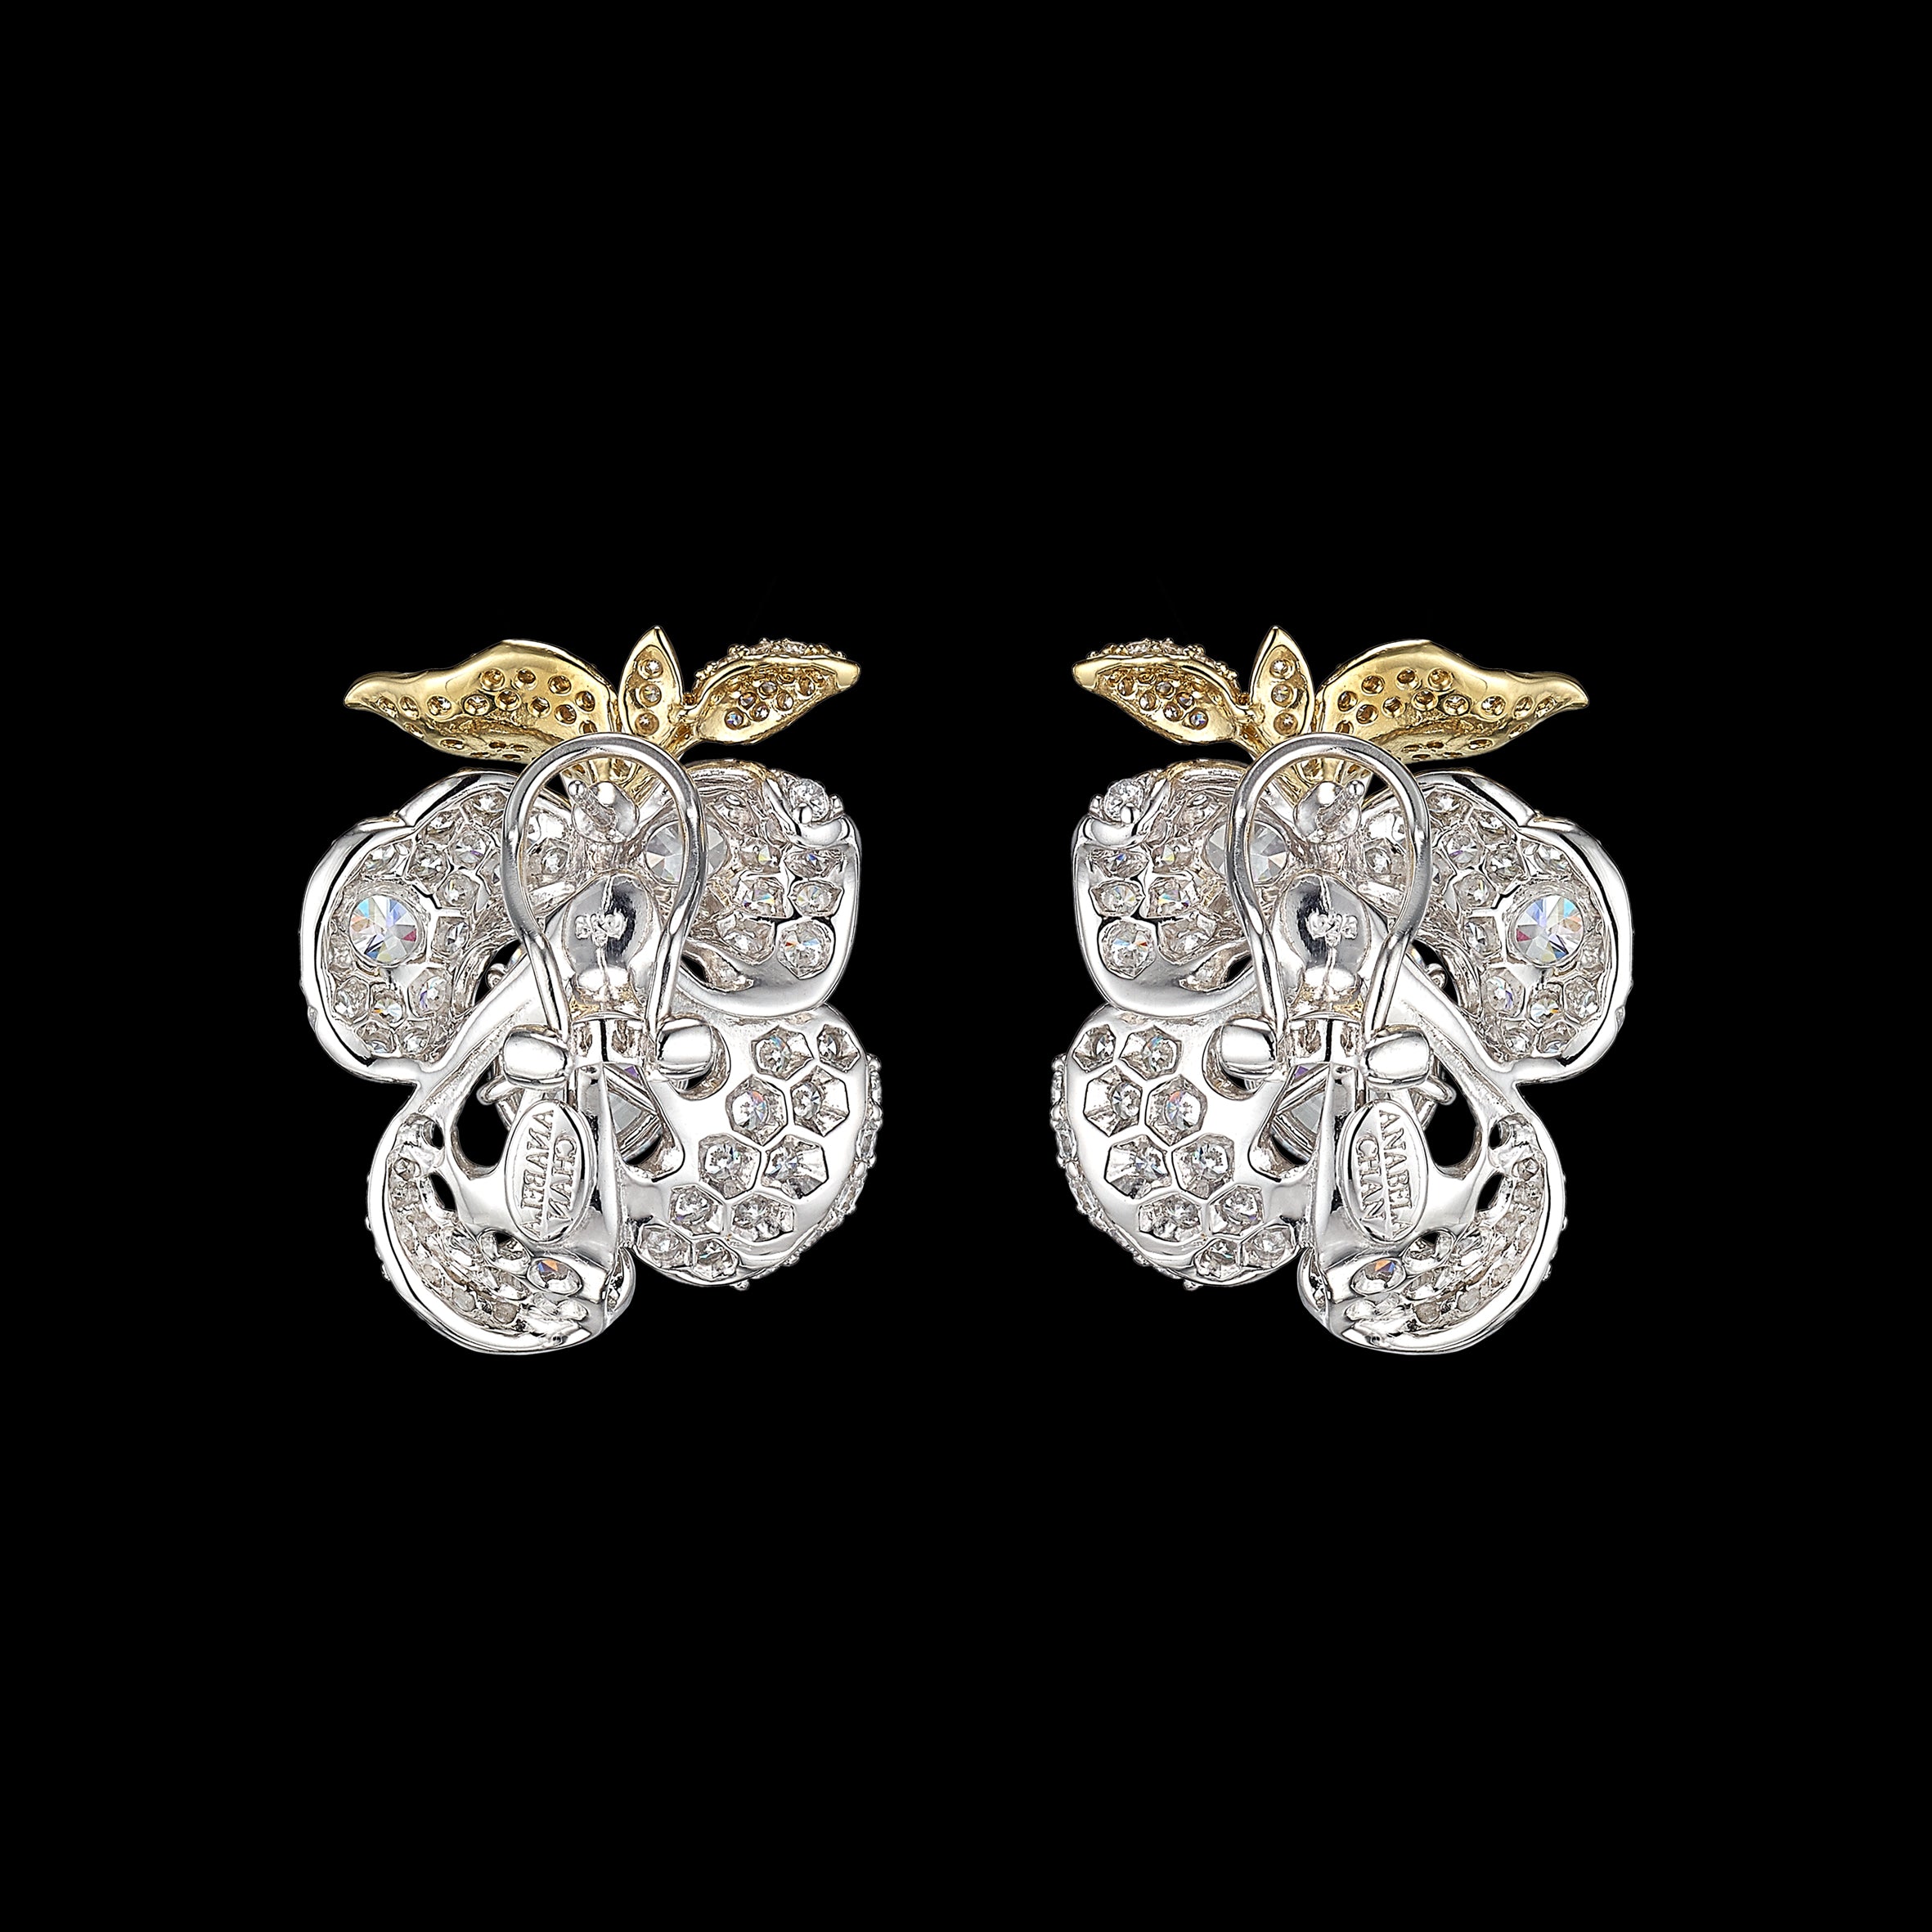 White Mini Blossom Diamond Earrings, Earring, Anabela Chan Joaillerie - Fine jewelry with laboratory grown and created gemstones hand-crafted in the United Kingdom. Anabela Chan Joaillerie is the first fine jewellery brand in the world to champion laboratory-grown and created gemstones with high jewellery design, artisanal craftsmanship and a focus on ethical and sustainable innovations.